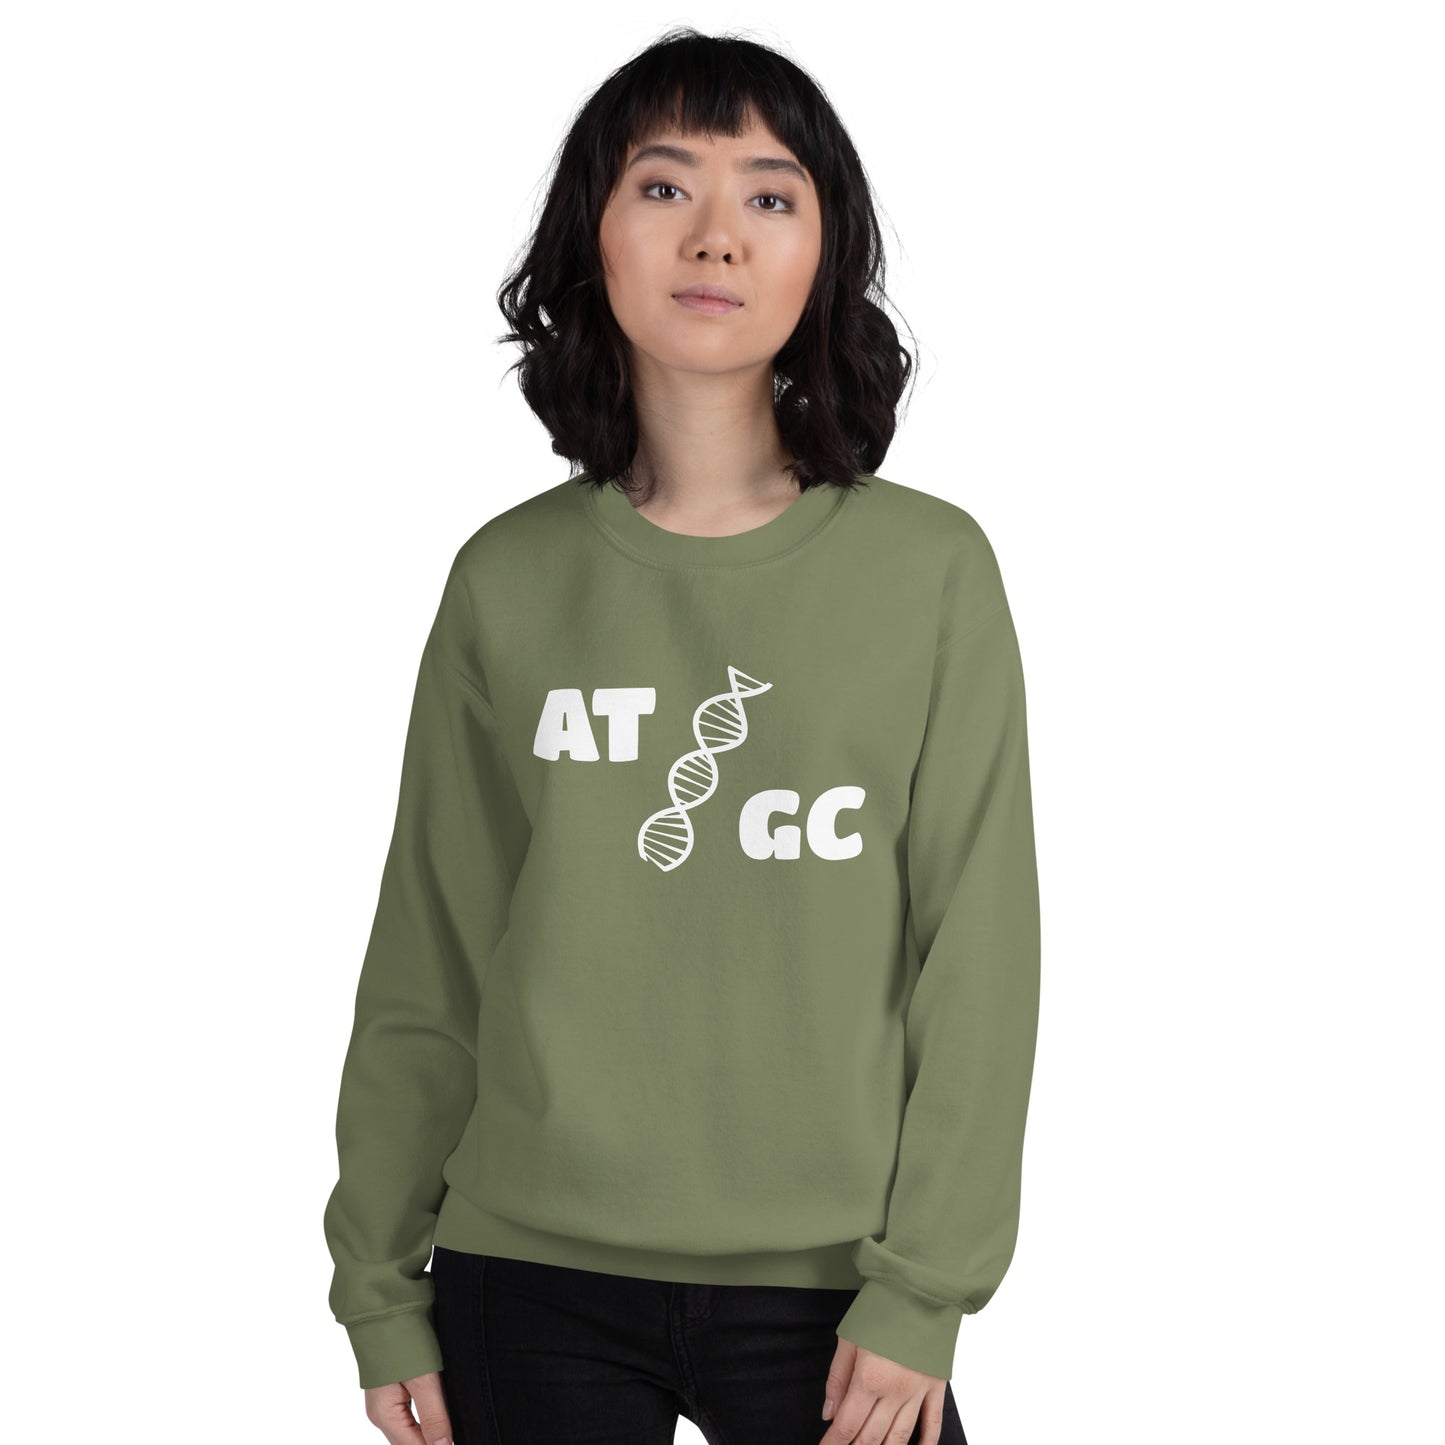 Women with military green sweatshirt with image of a DNA string and the text "ATGC"